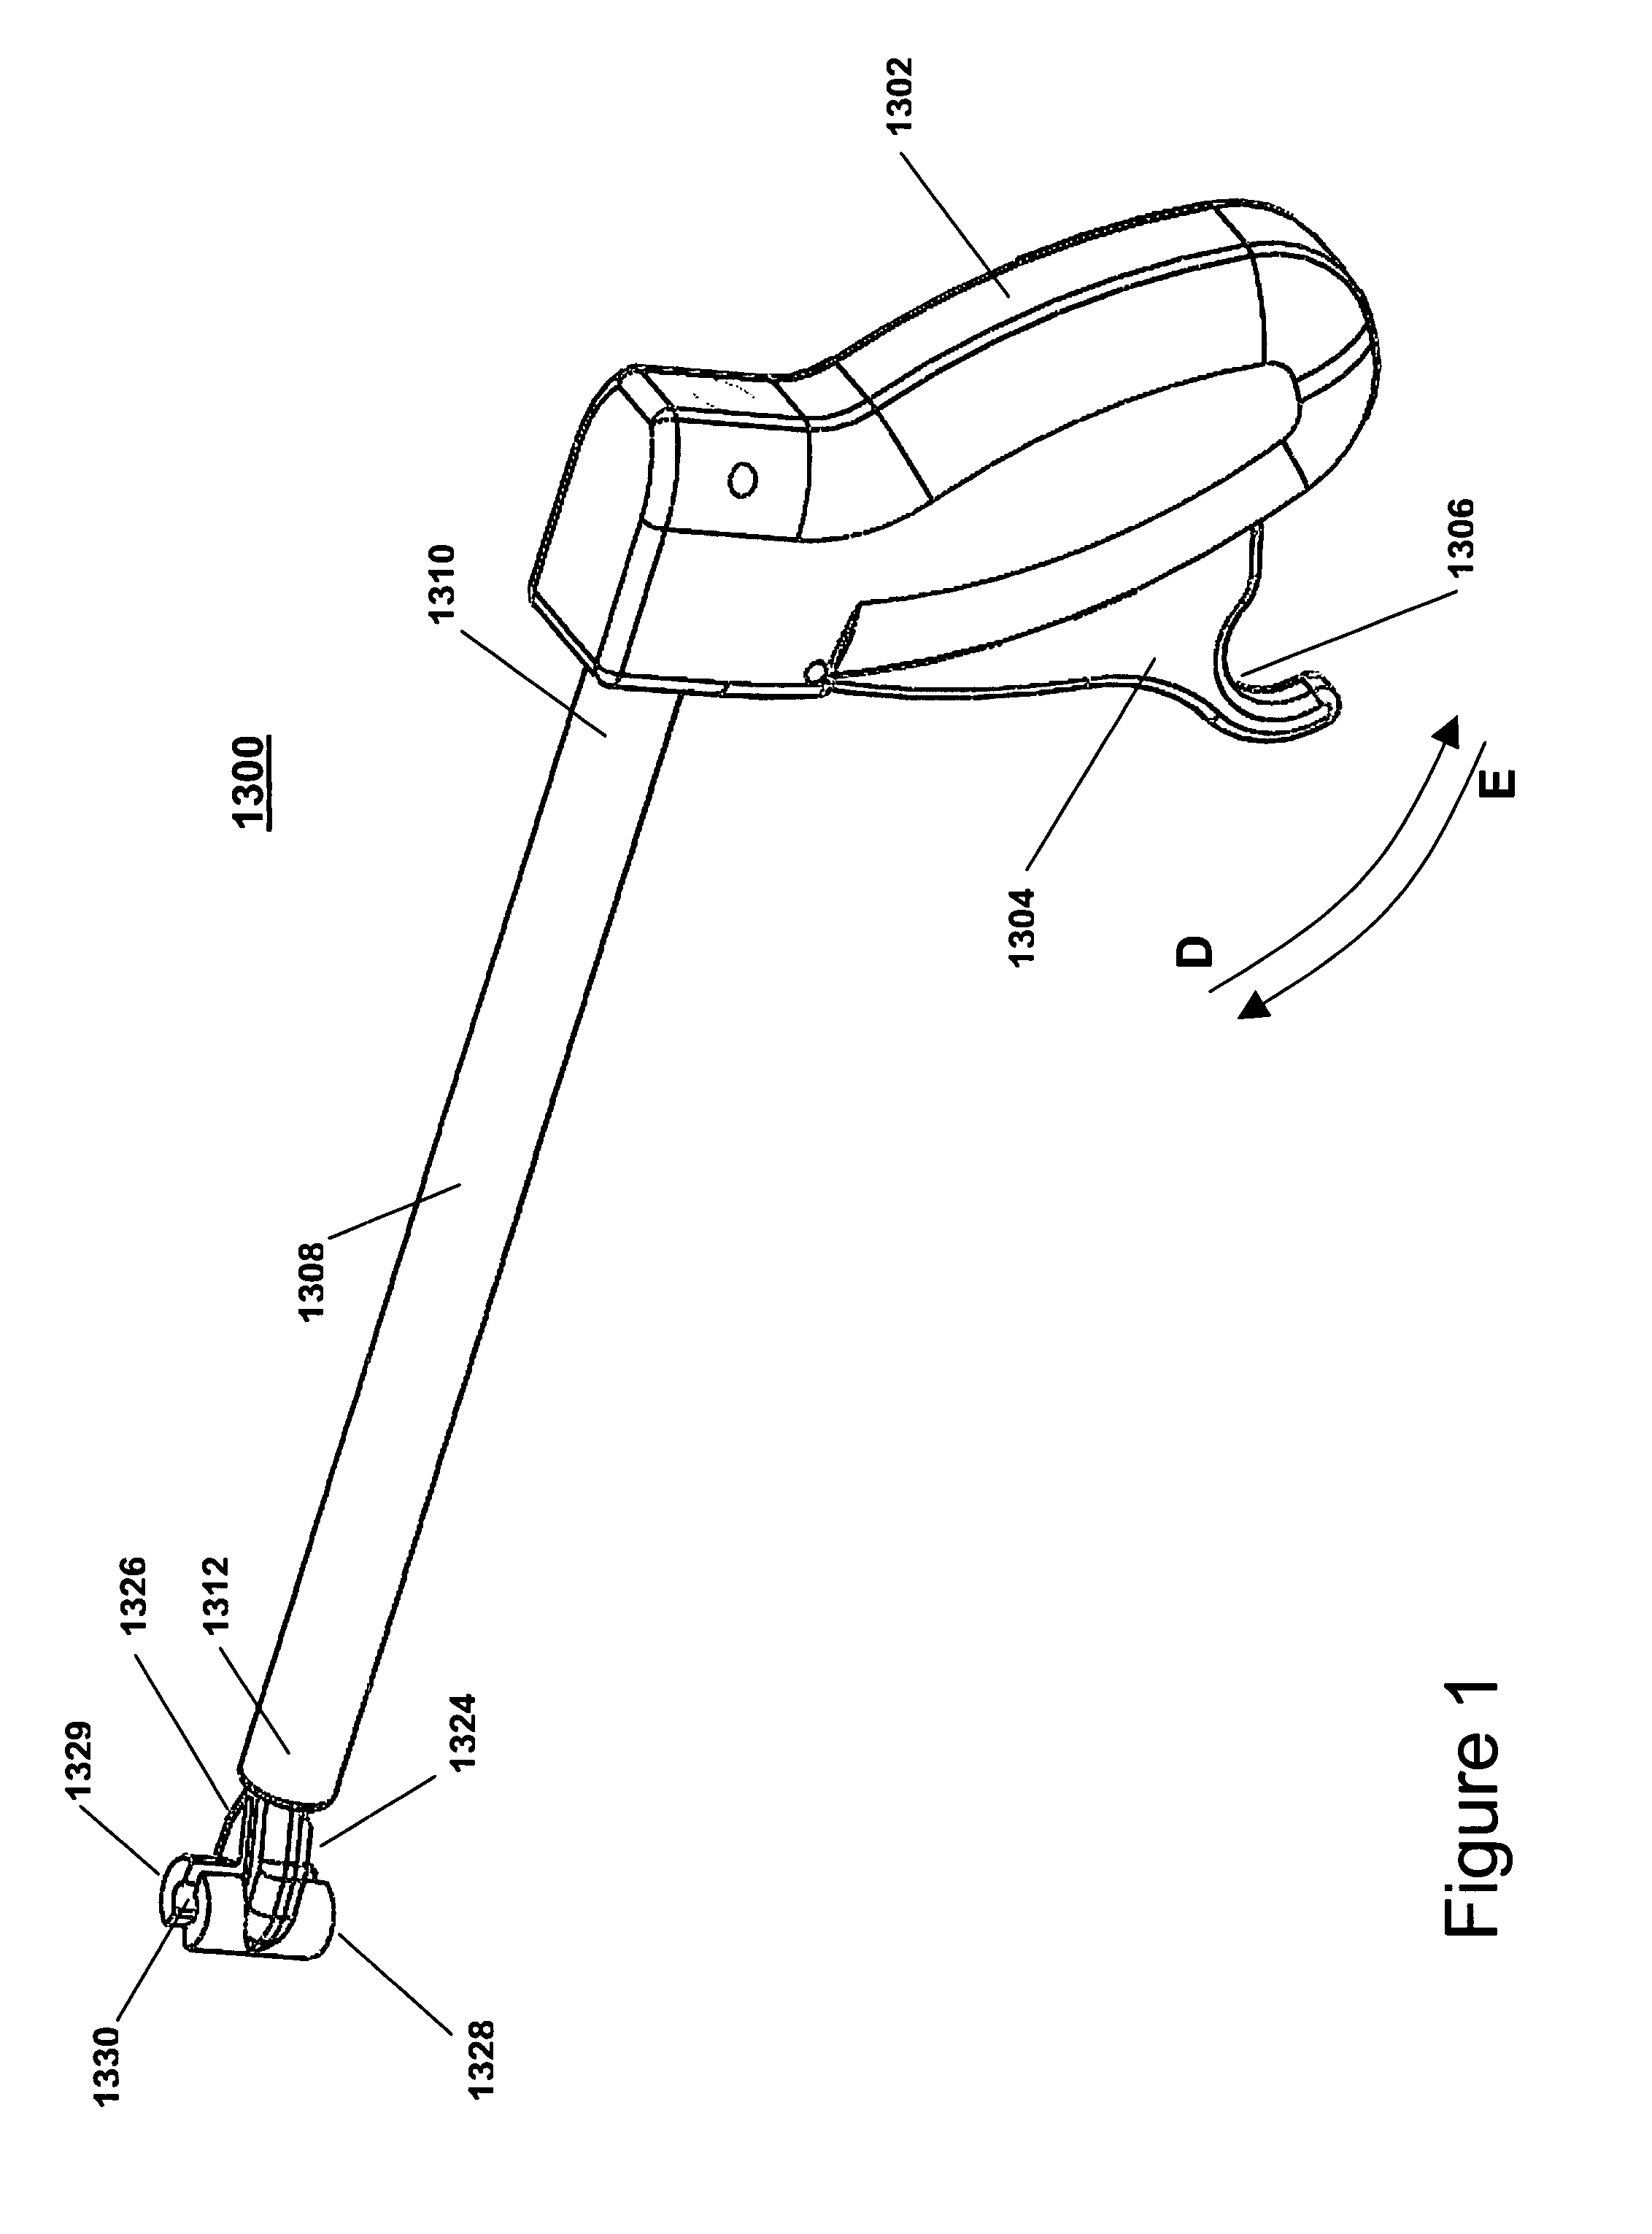 Guide forceps device for use with vertebral treatment device, system and methods of use